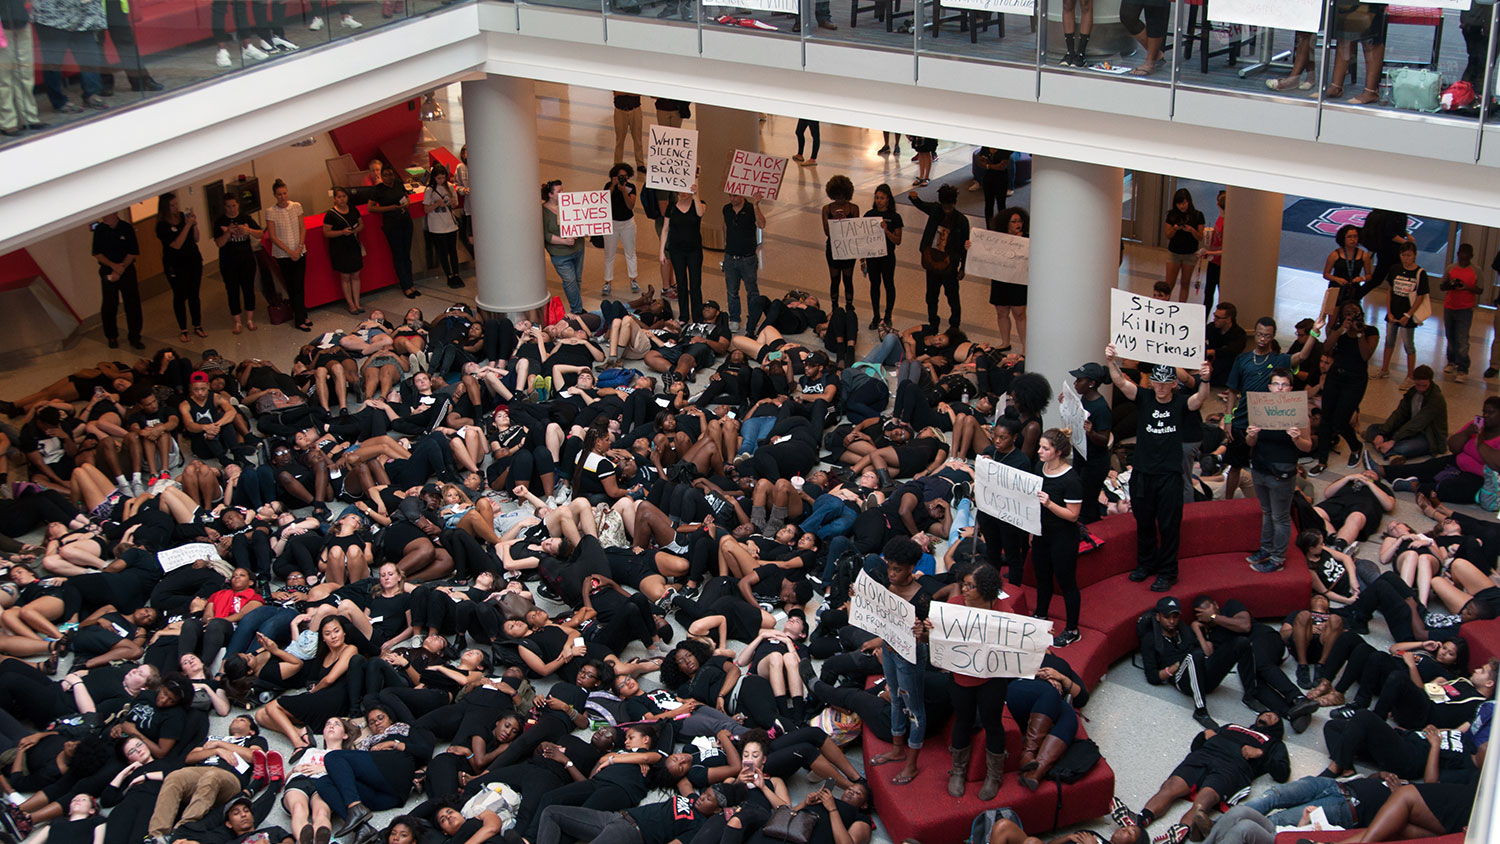 Die-in protest at NC State University on September 23, 2016